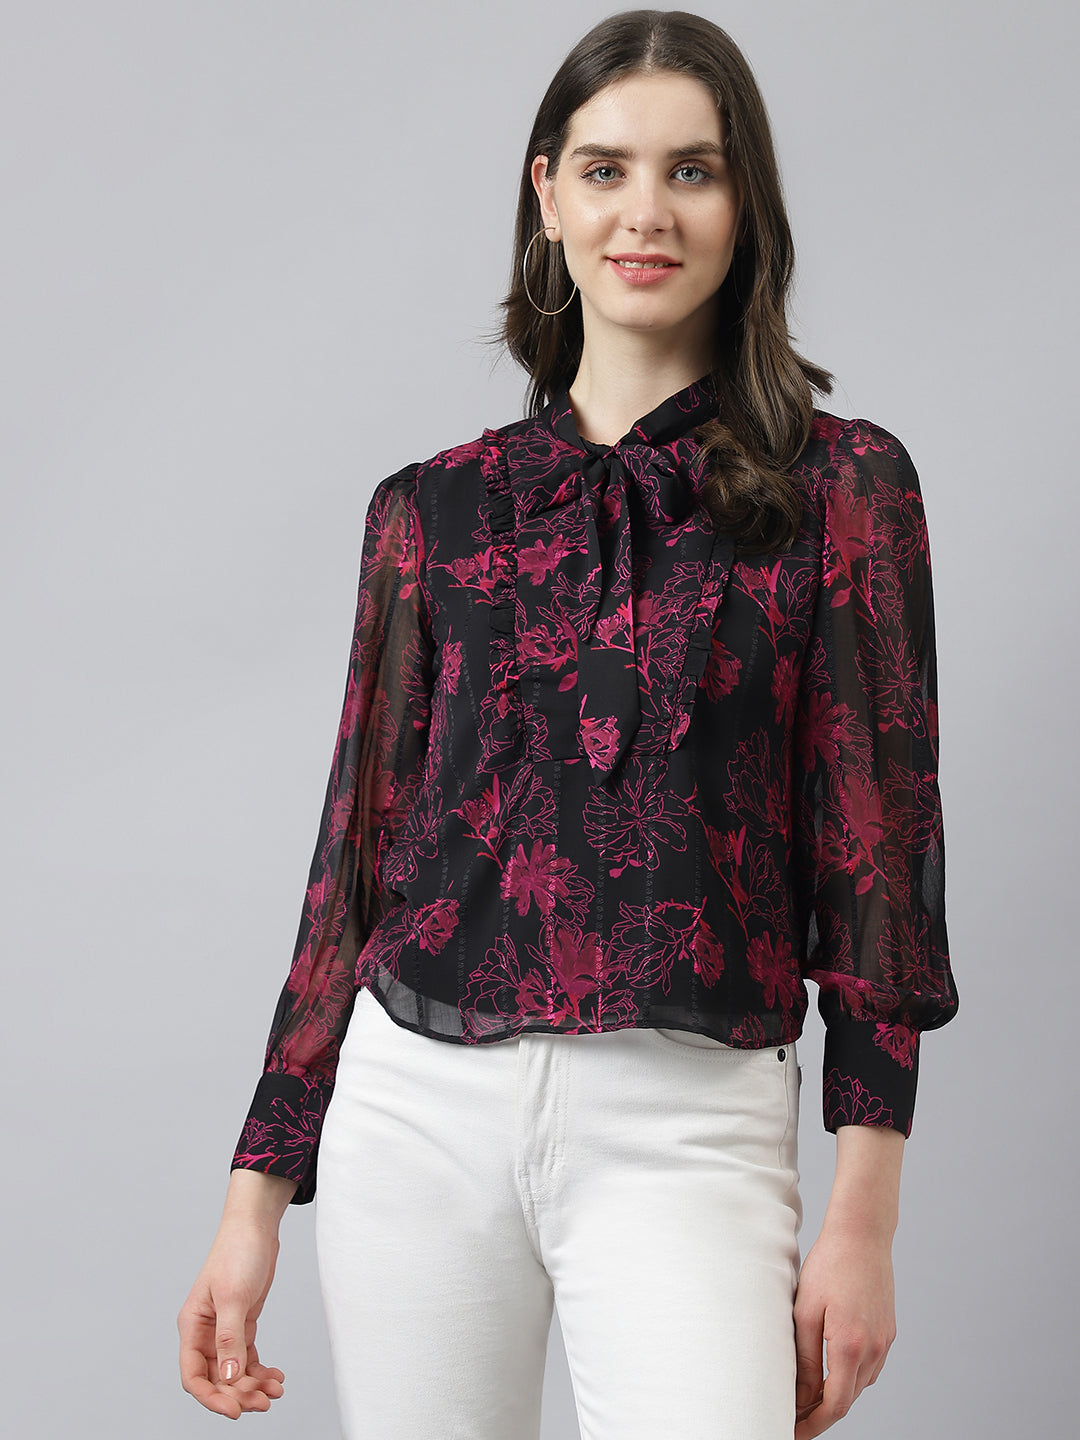 Black Flower Print Shirt Top With Knotted Neckline